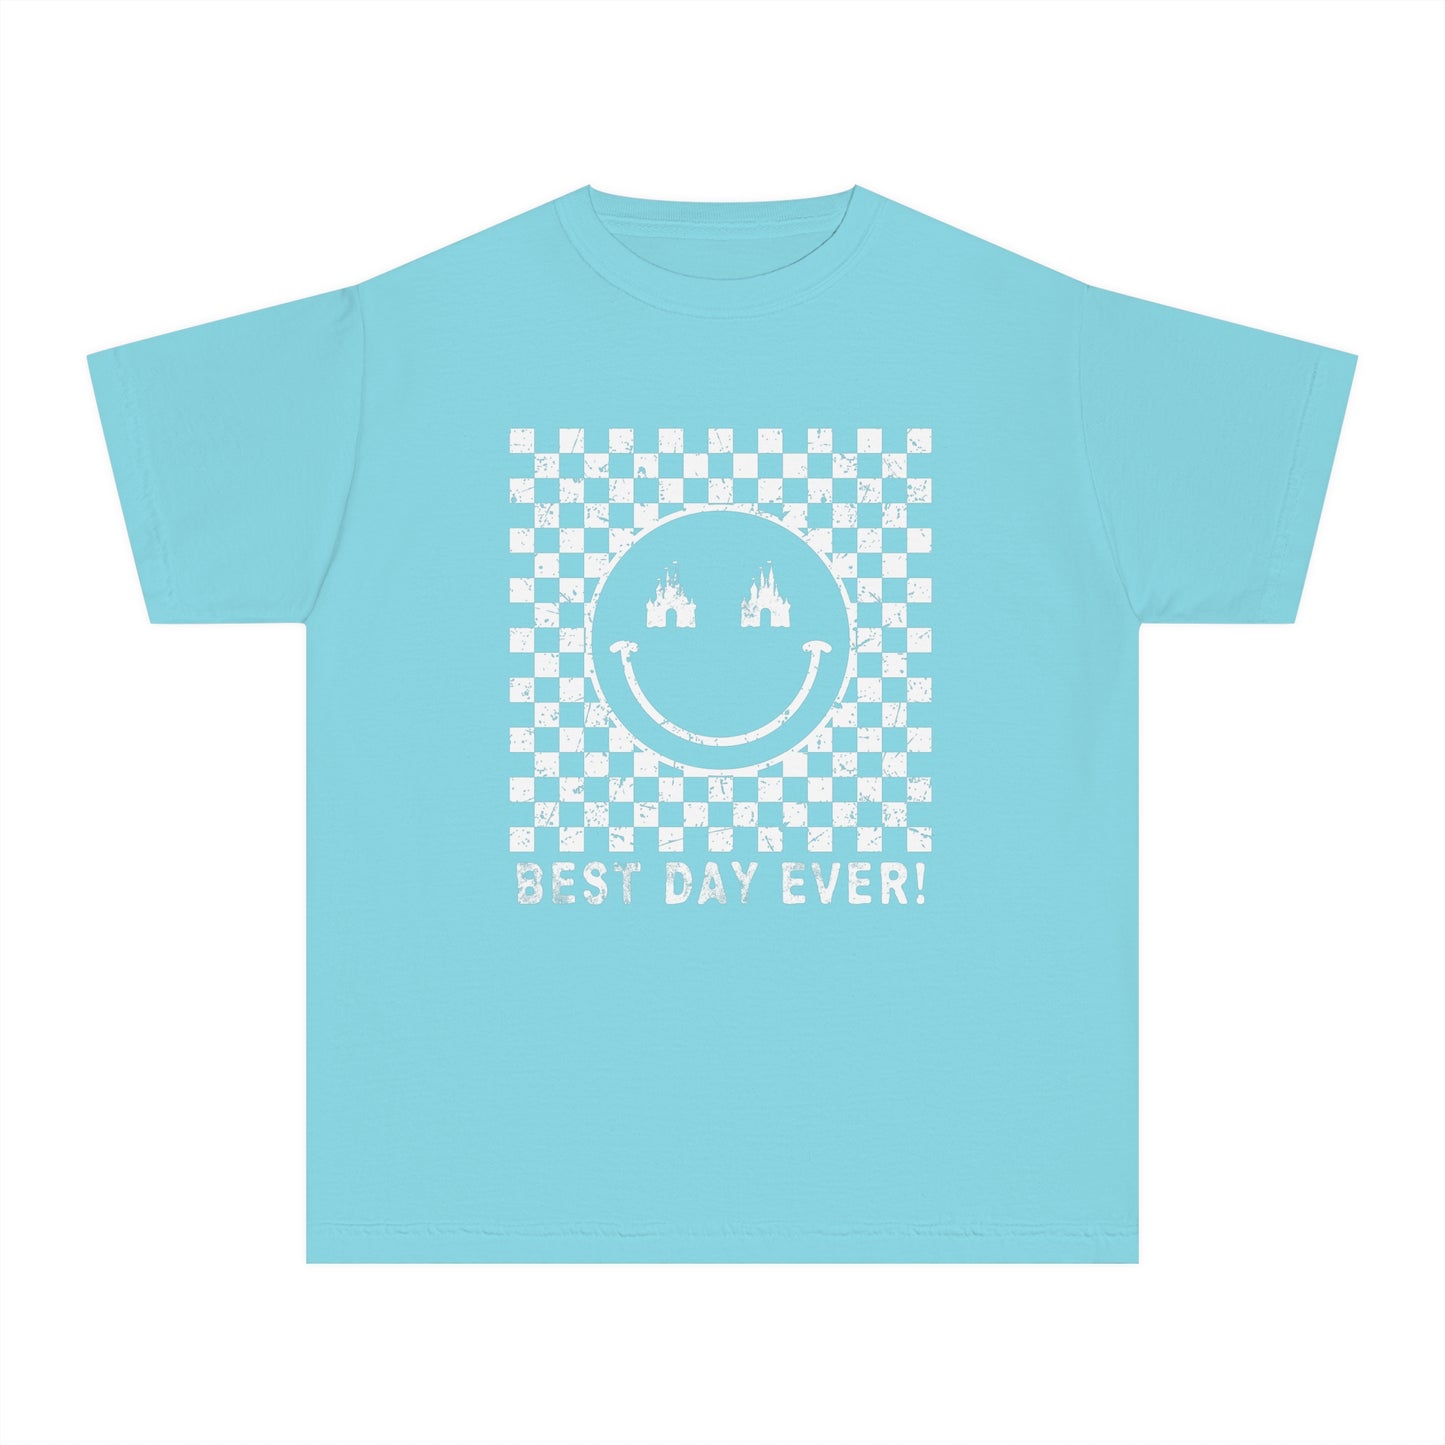 Retro Checkered Best Day Ever Comfort Colors Youth Midweight Tee